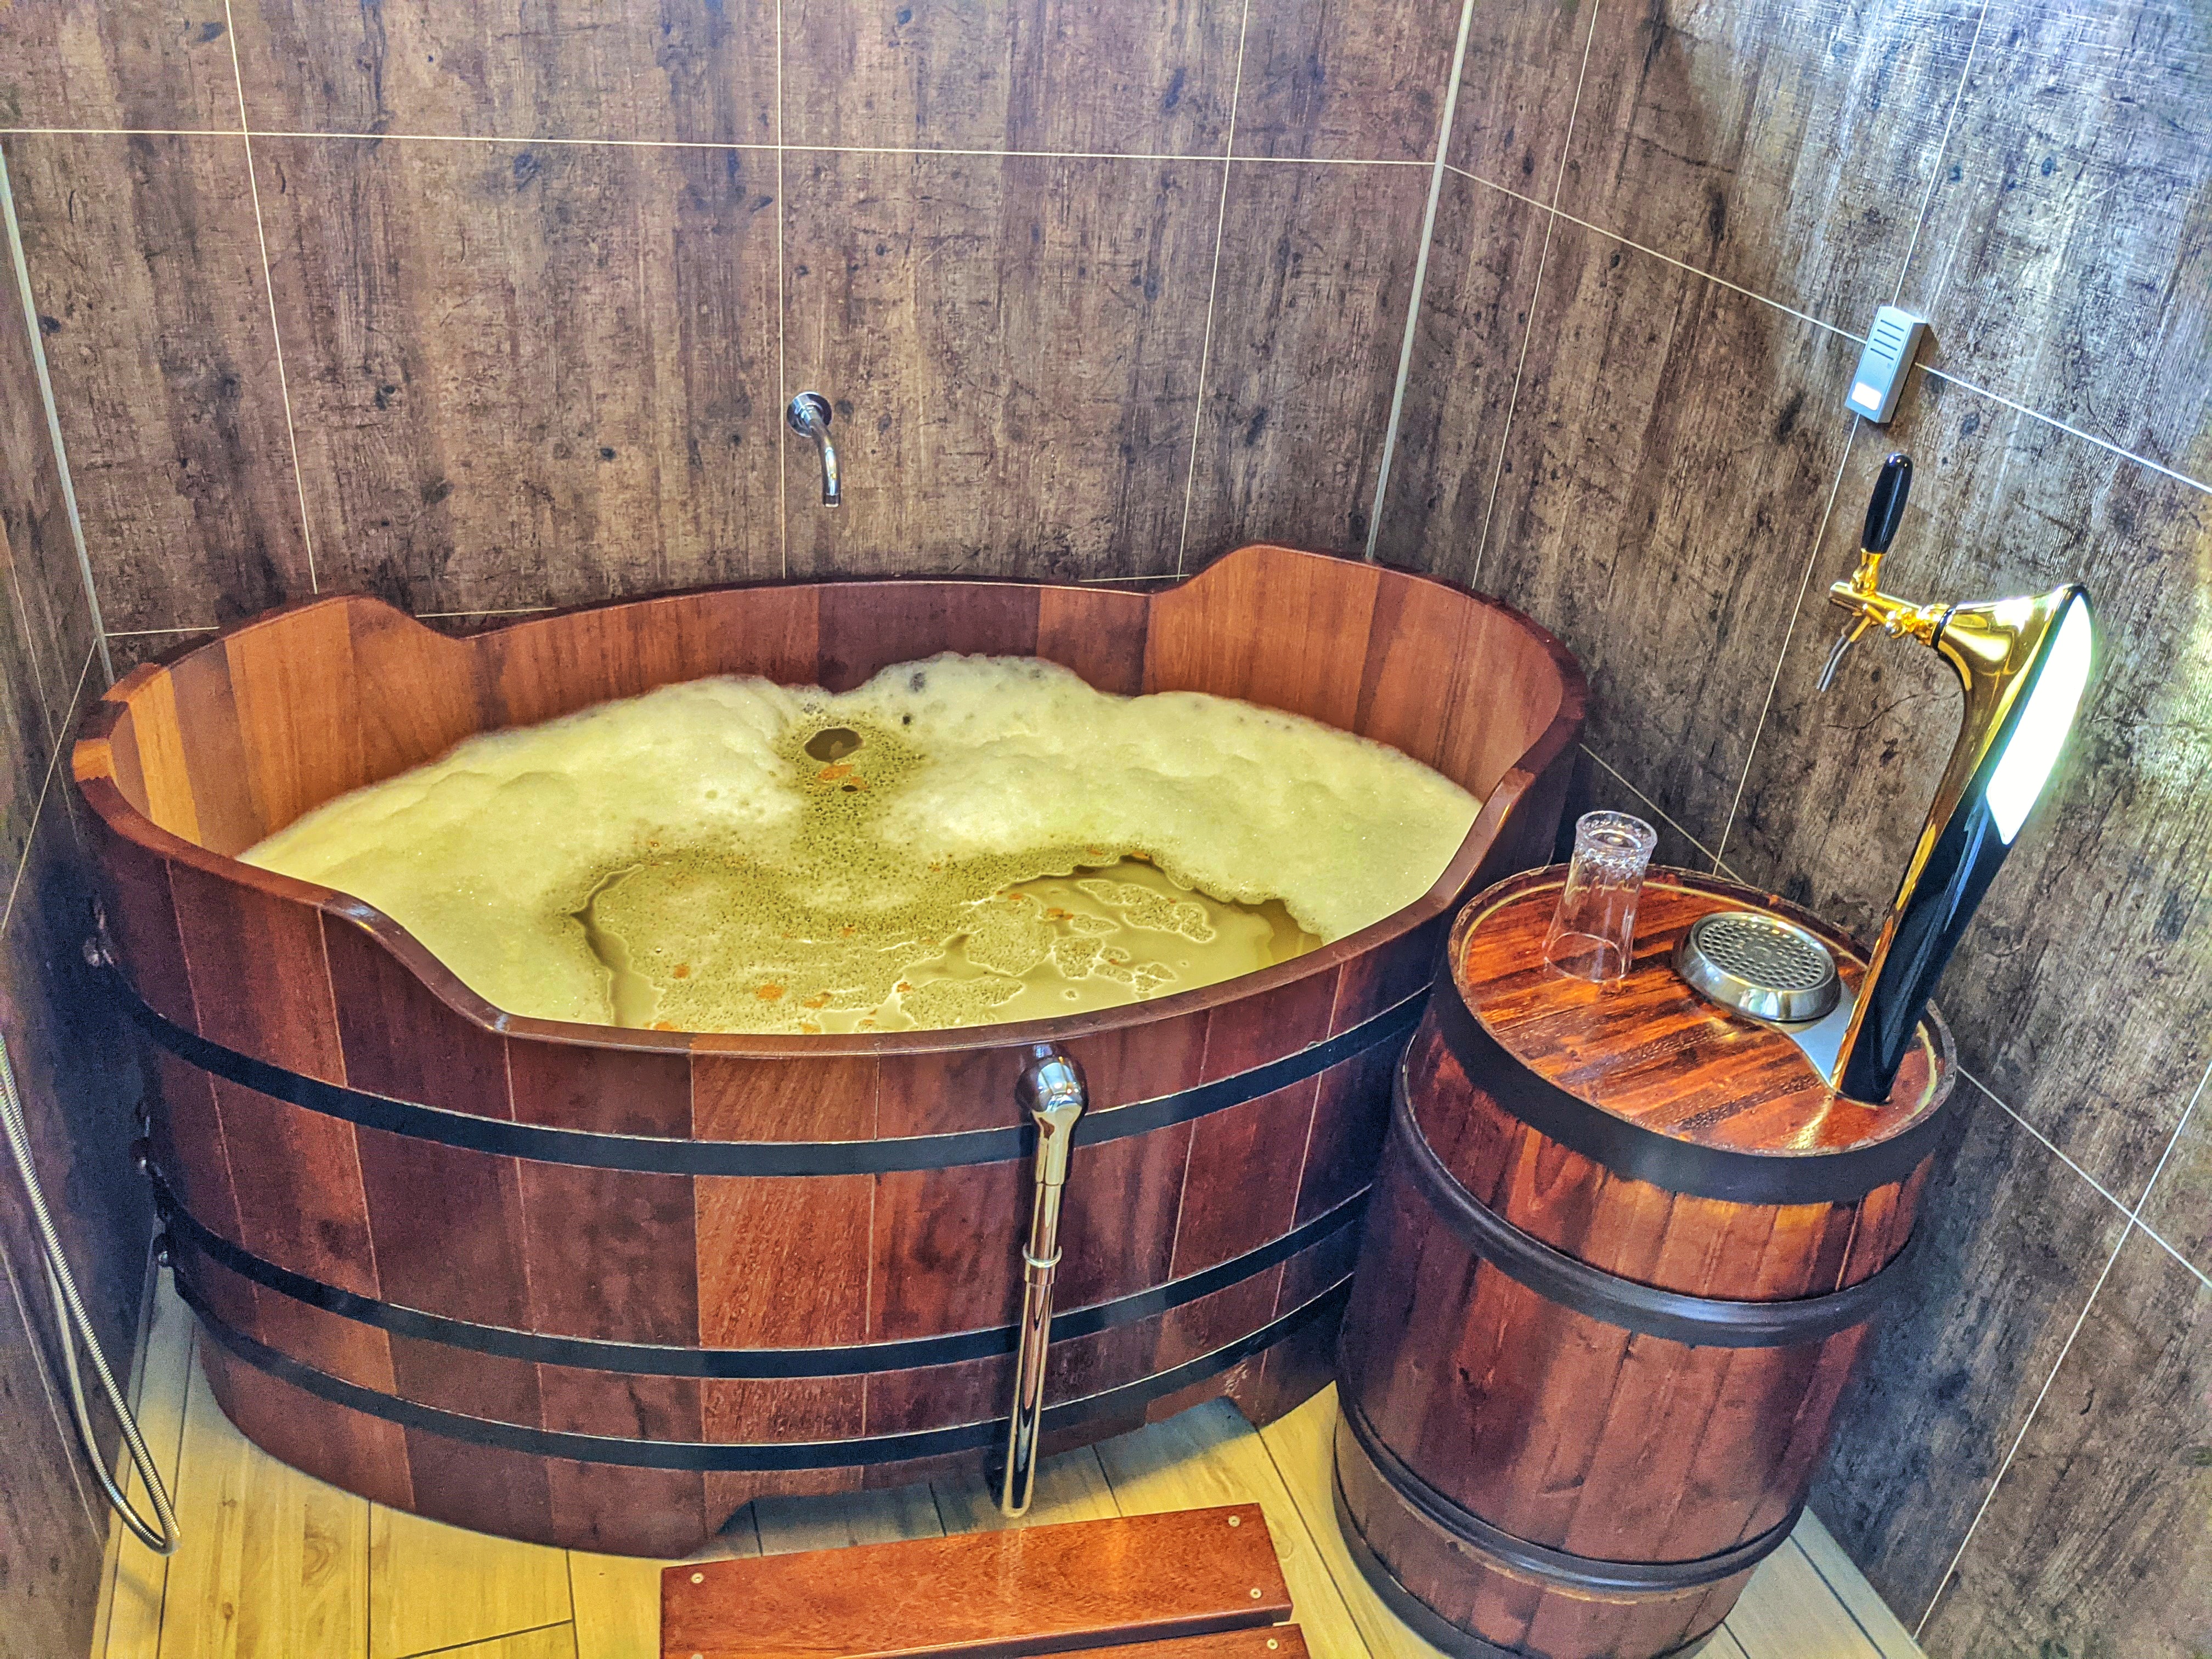 A soaking tub at the beer spa in Iceland